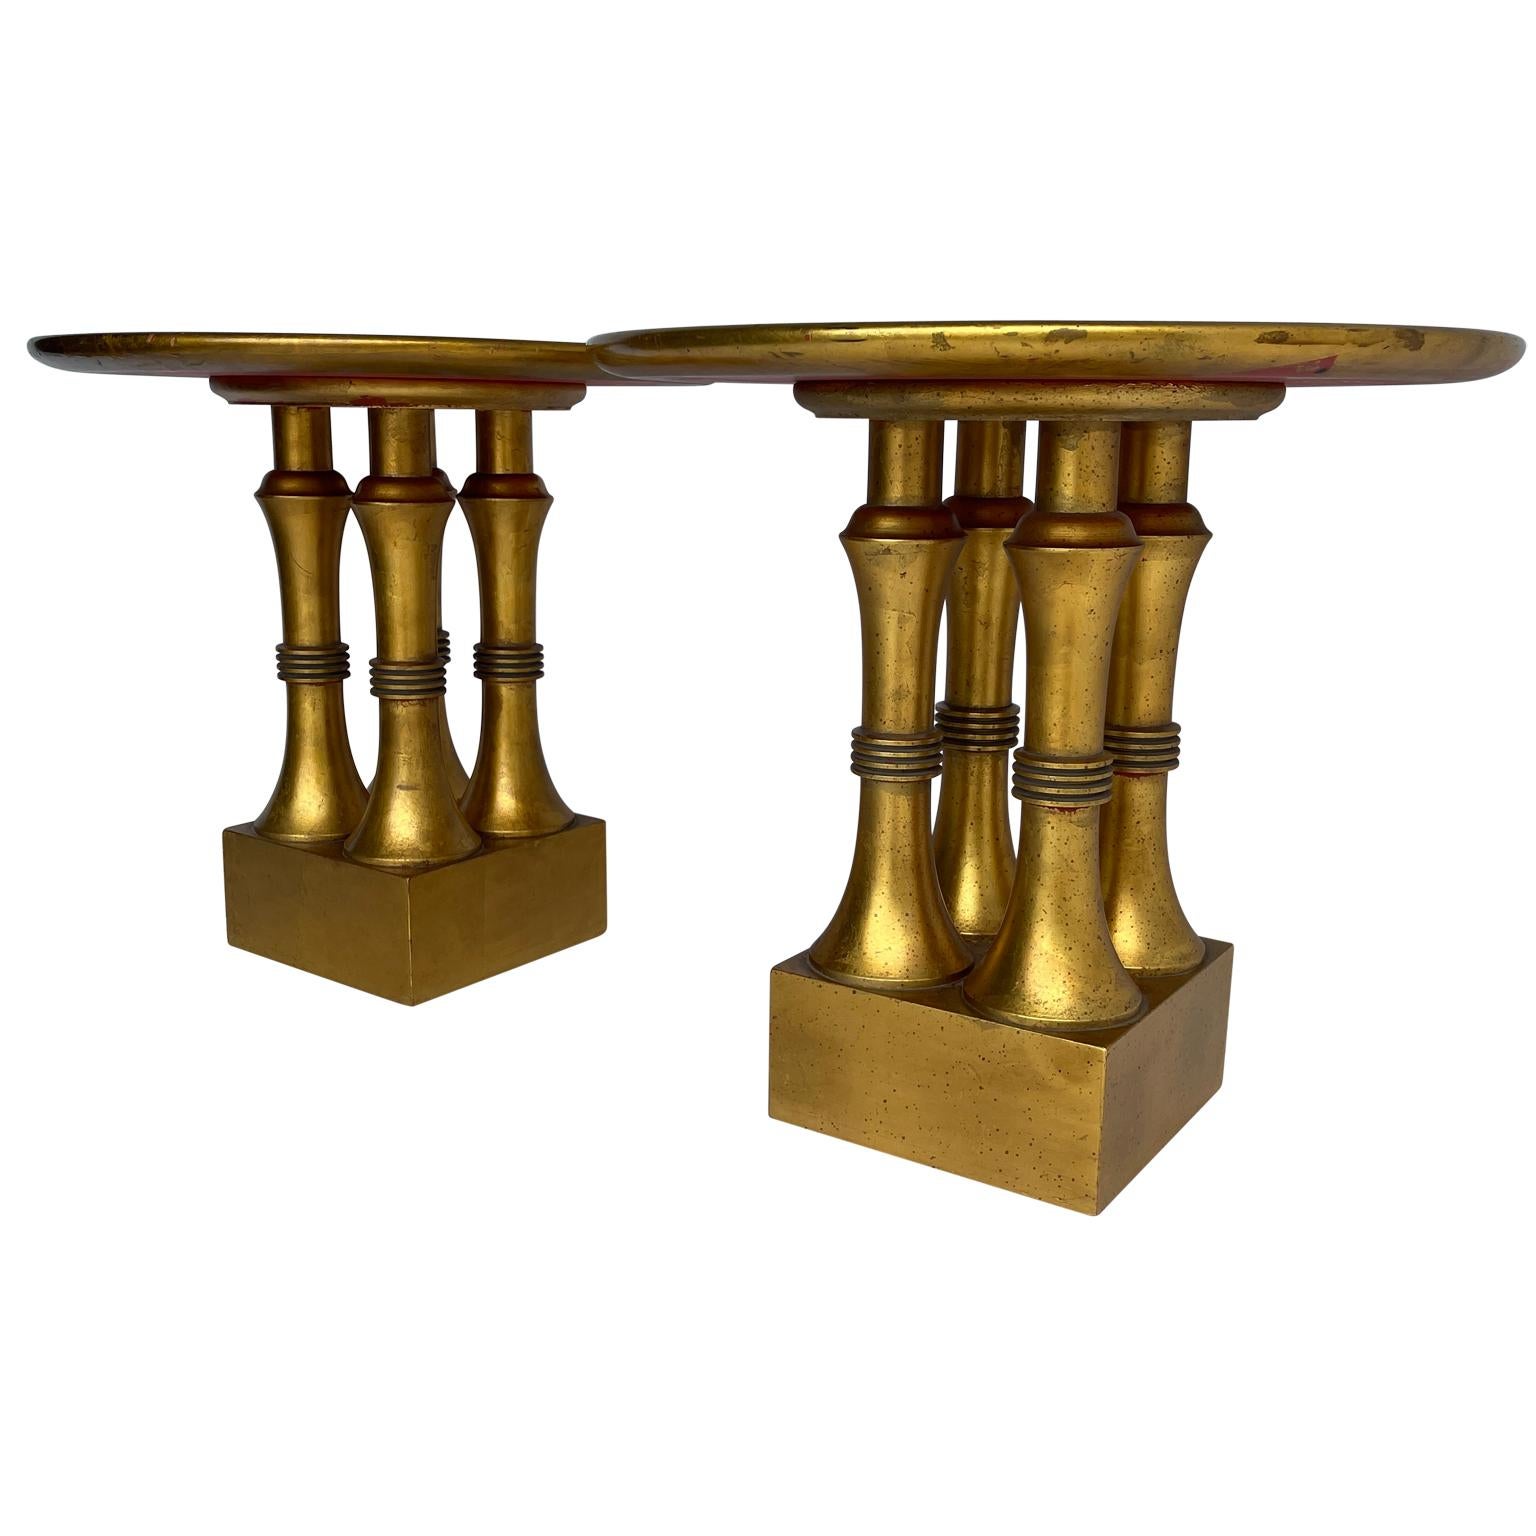 This pair of round end tables are American made, Circa 1950. The sweet tables are covered in gold leaf over a red lacquer base. The columns are carved, balancing a nice square base. Round and low profile, these tables have so many uses; bedside